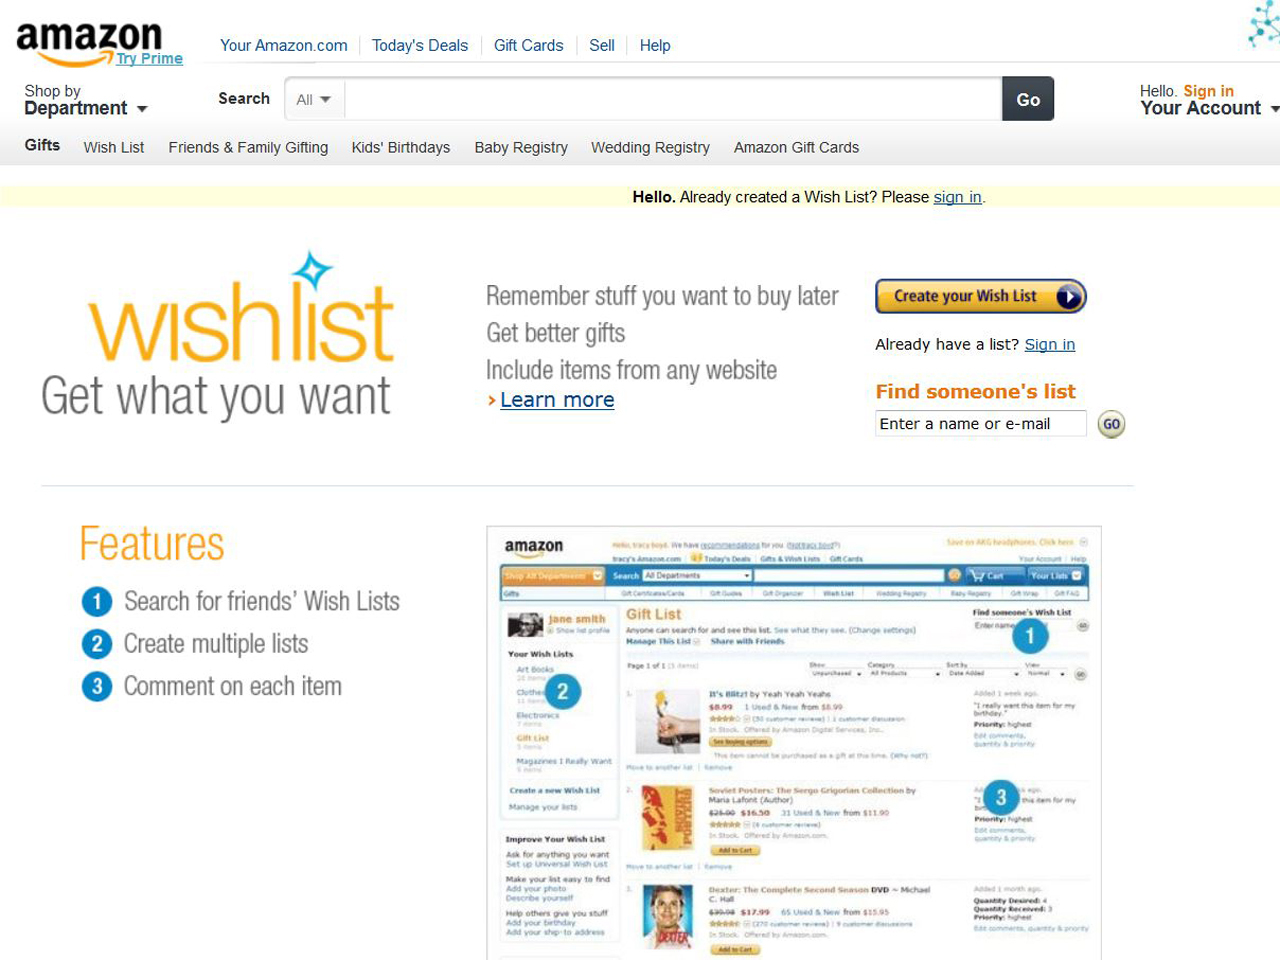 How to share your amazon wish list